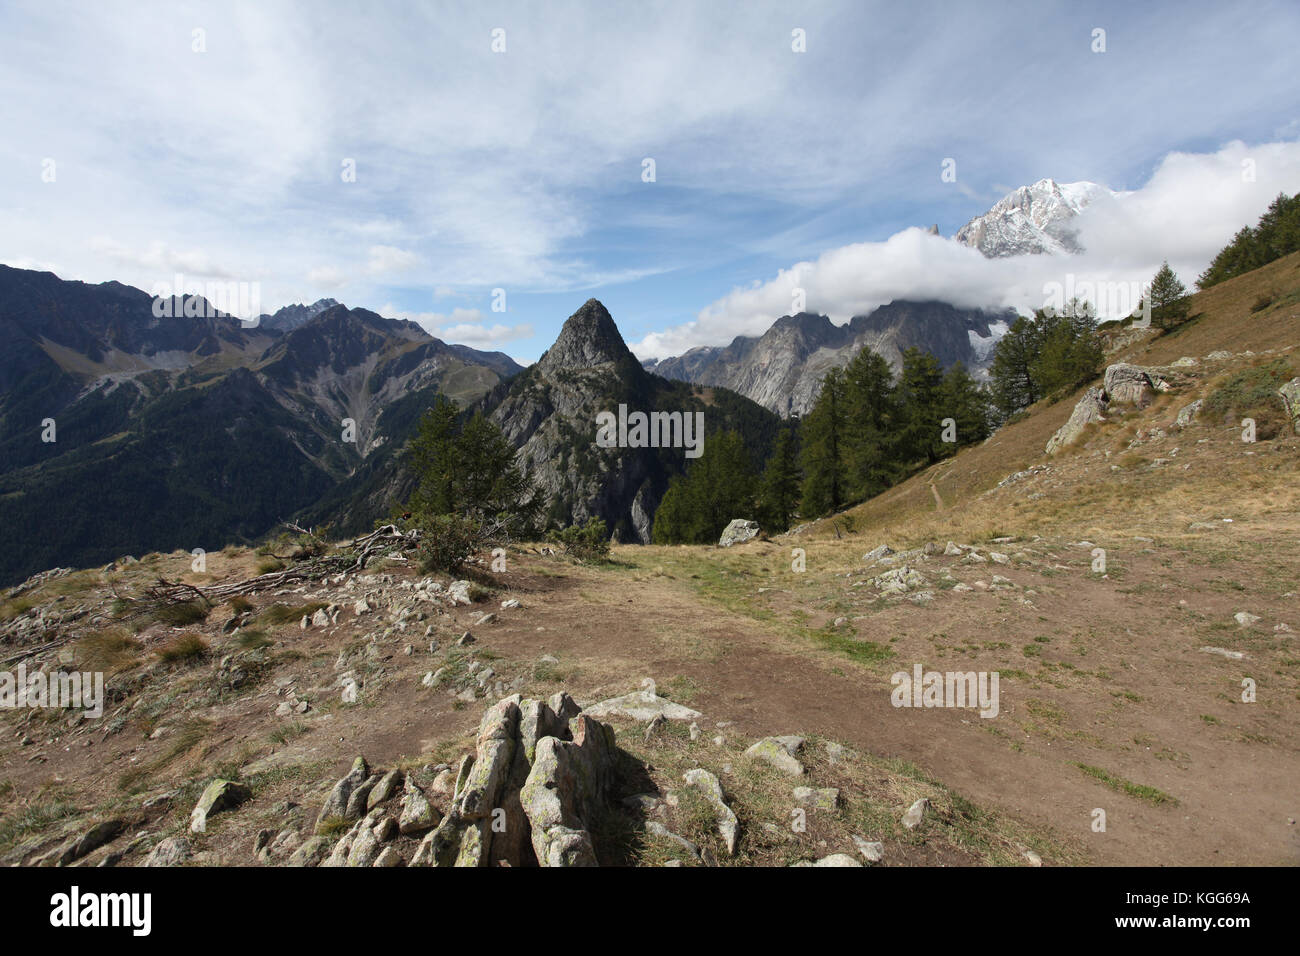 beautiful panoramic view of the alps around the Mont Blanc mountain range in Europe. Tour the Mont Blanc hiking around glaciers, forests and streams Stock Photo